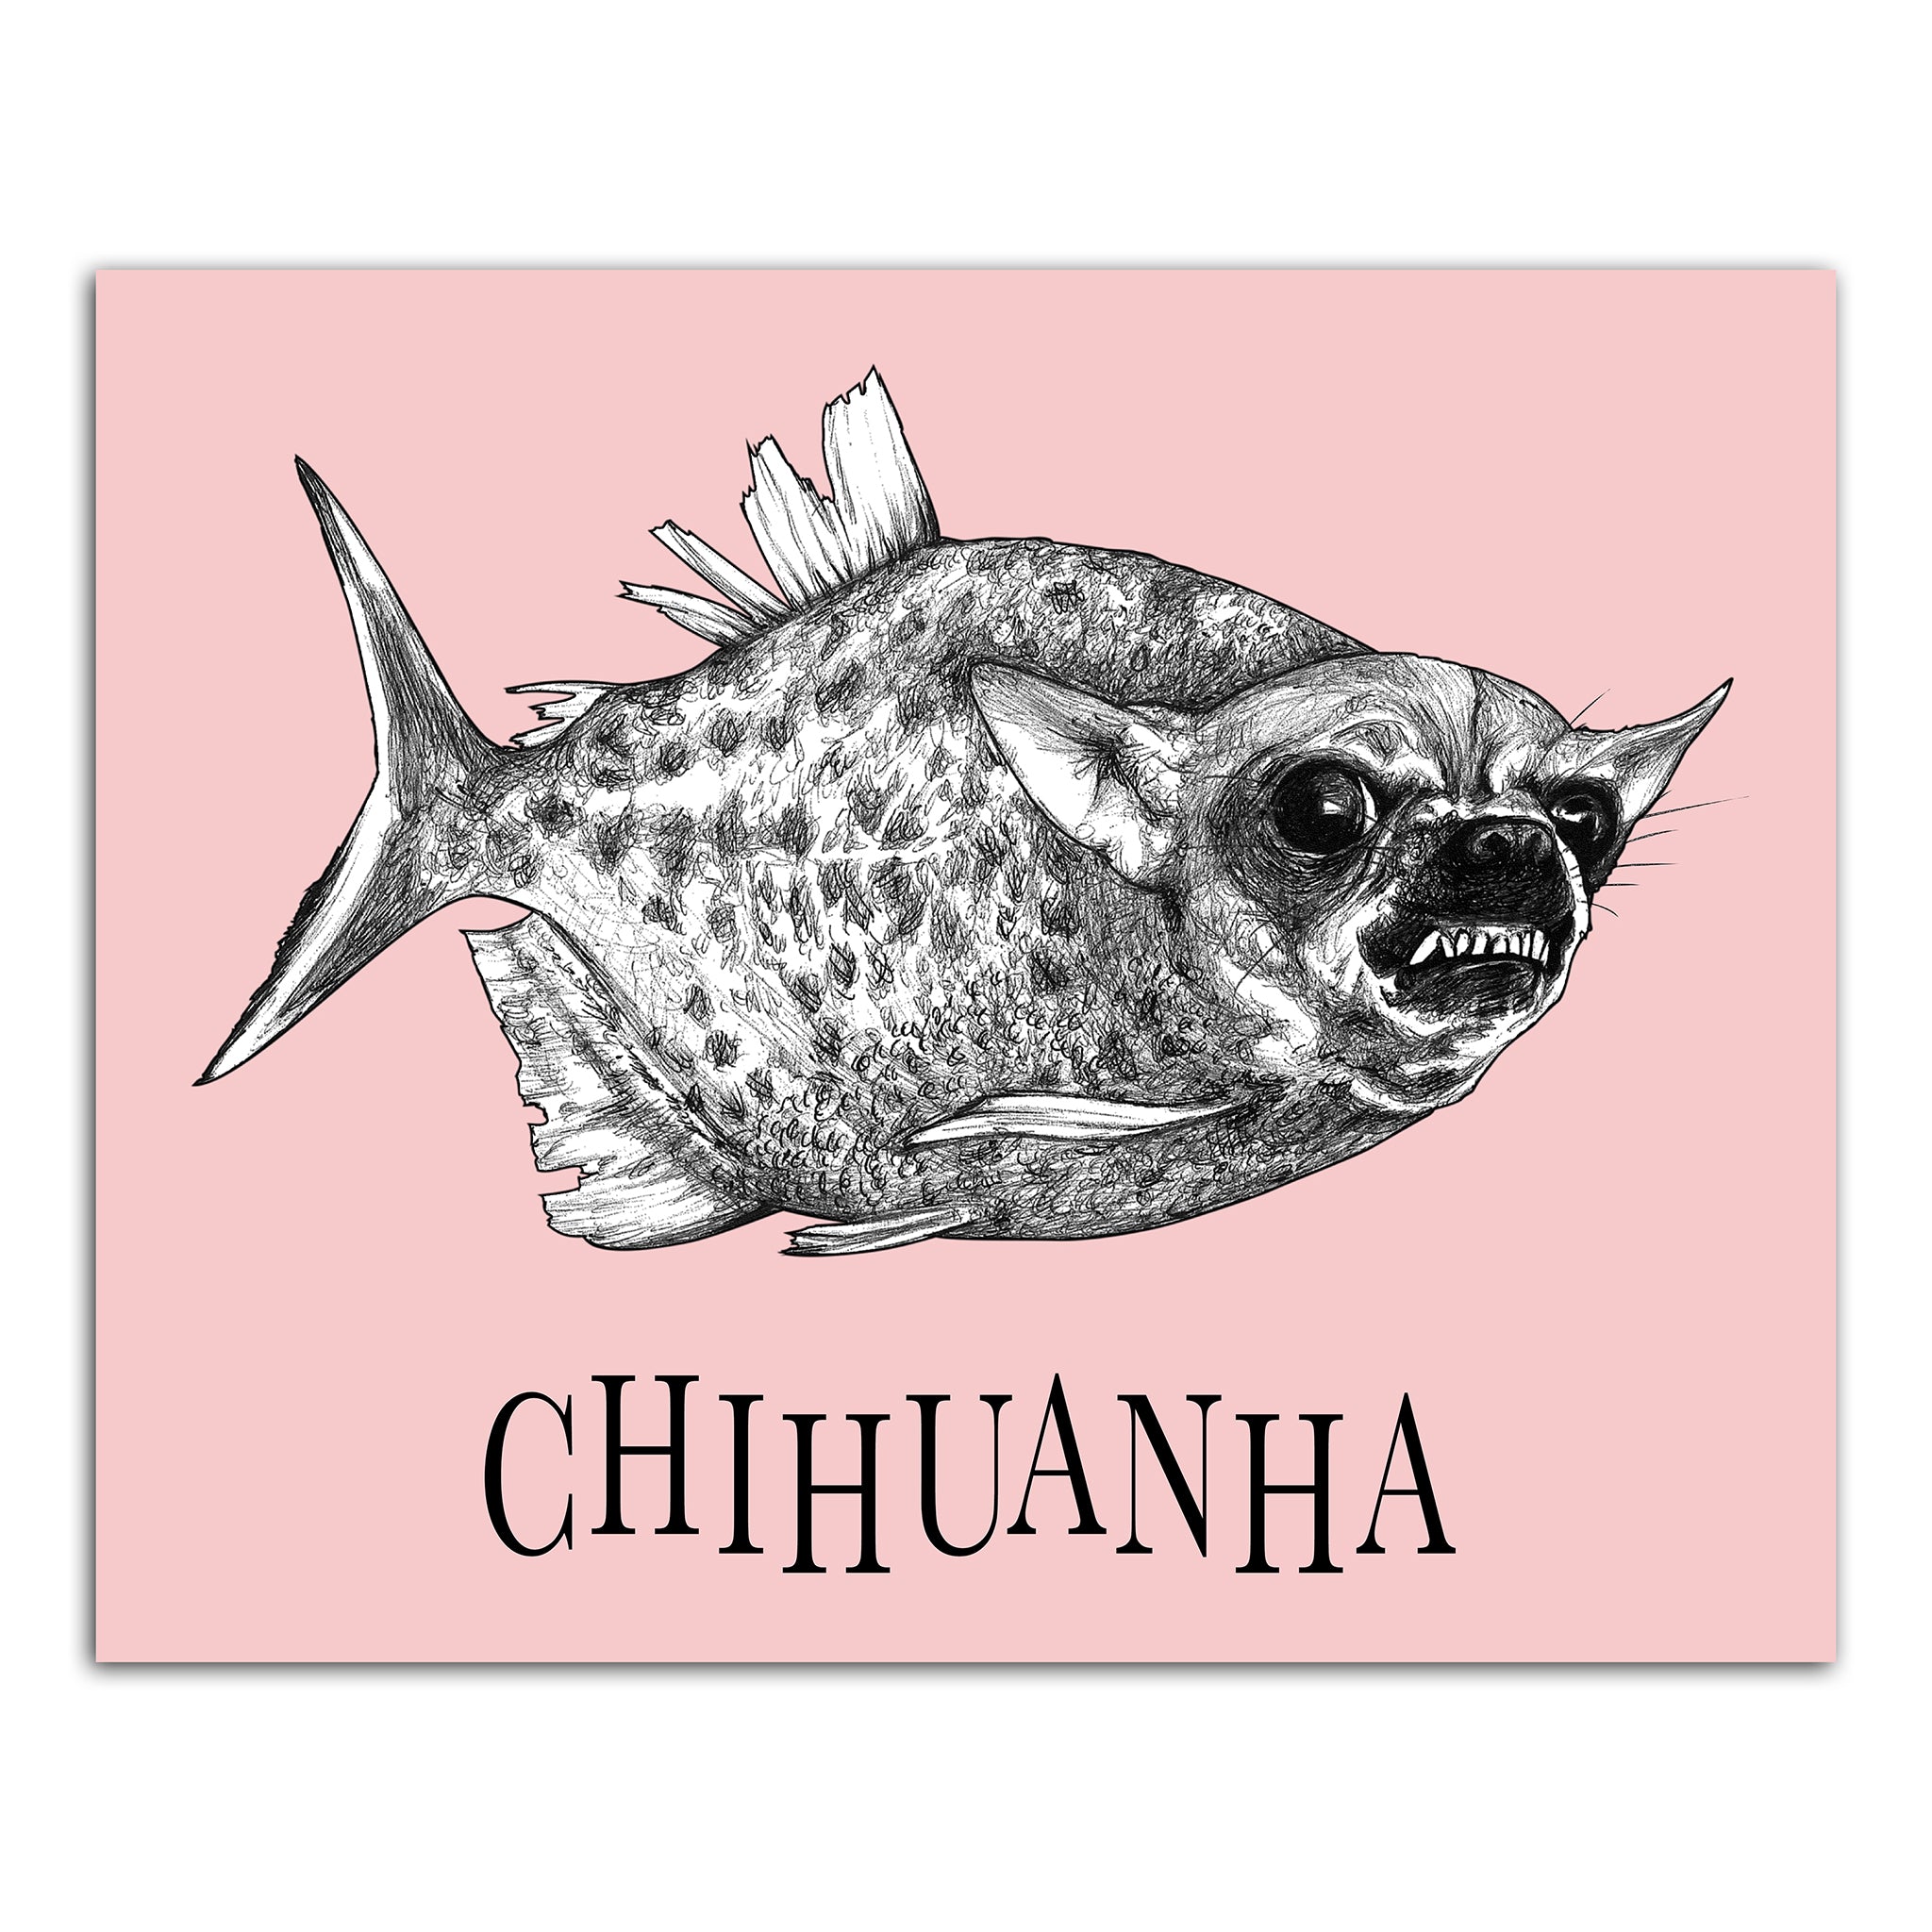 Chihuanha 8x10" Color Print